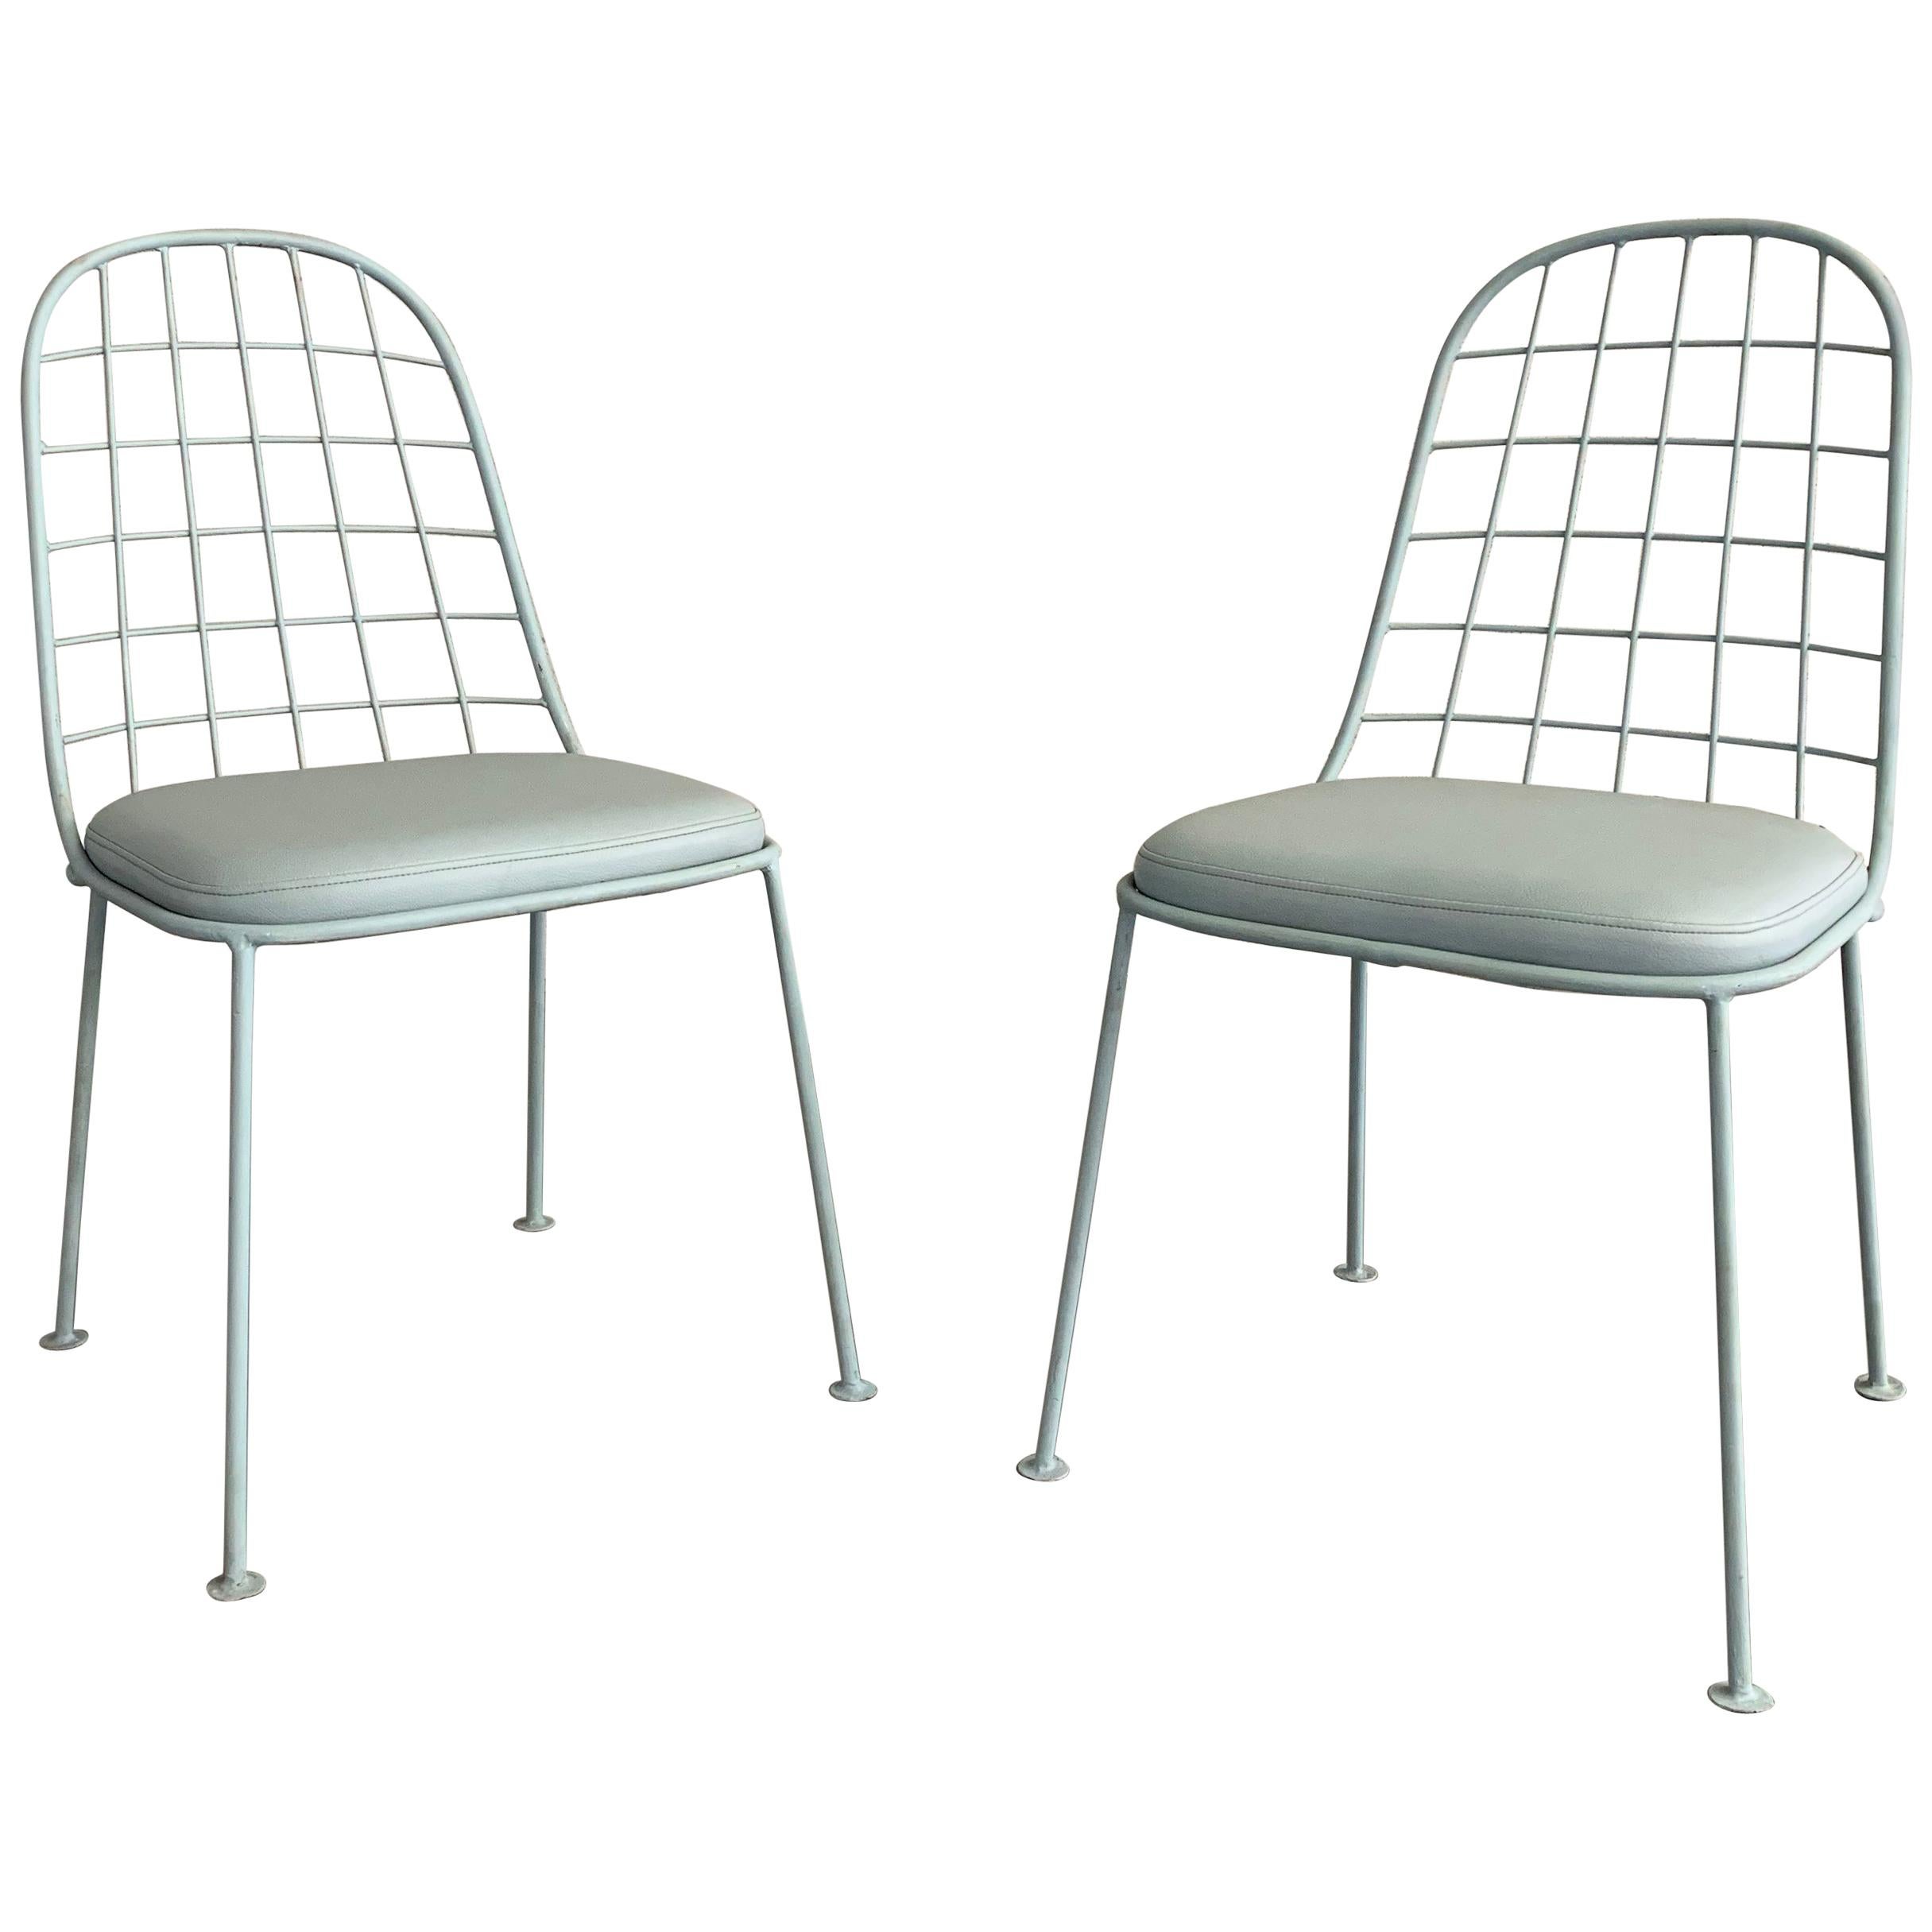 Pair of Mid-Century Modern Painted Wrought Iron Outdoor Patio Chairs